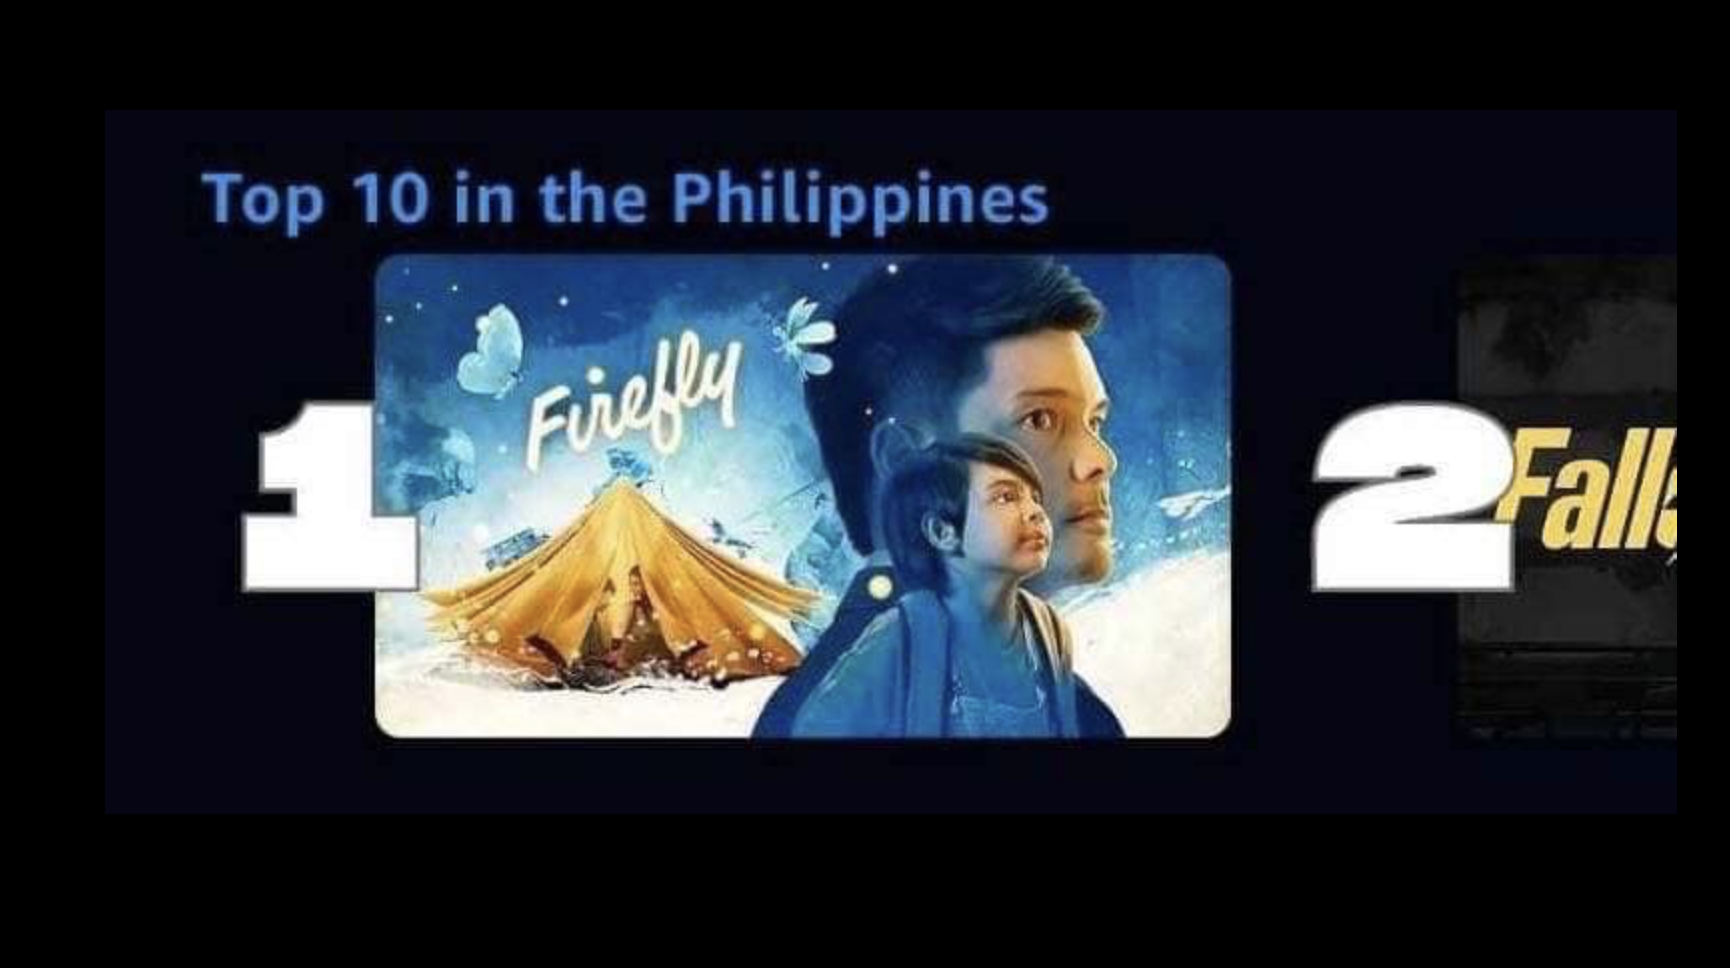 ‘Firefly’ becomes the #1 movie in Prime Video Philippines in less than 24 hours 